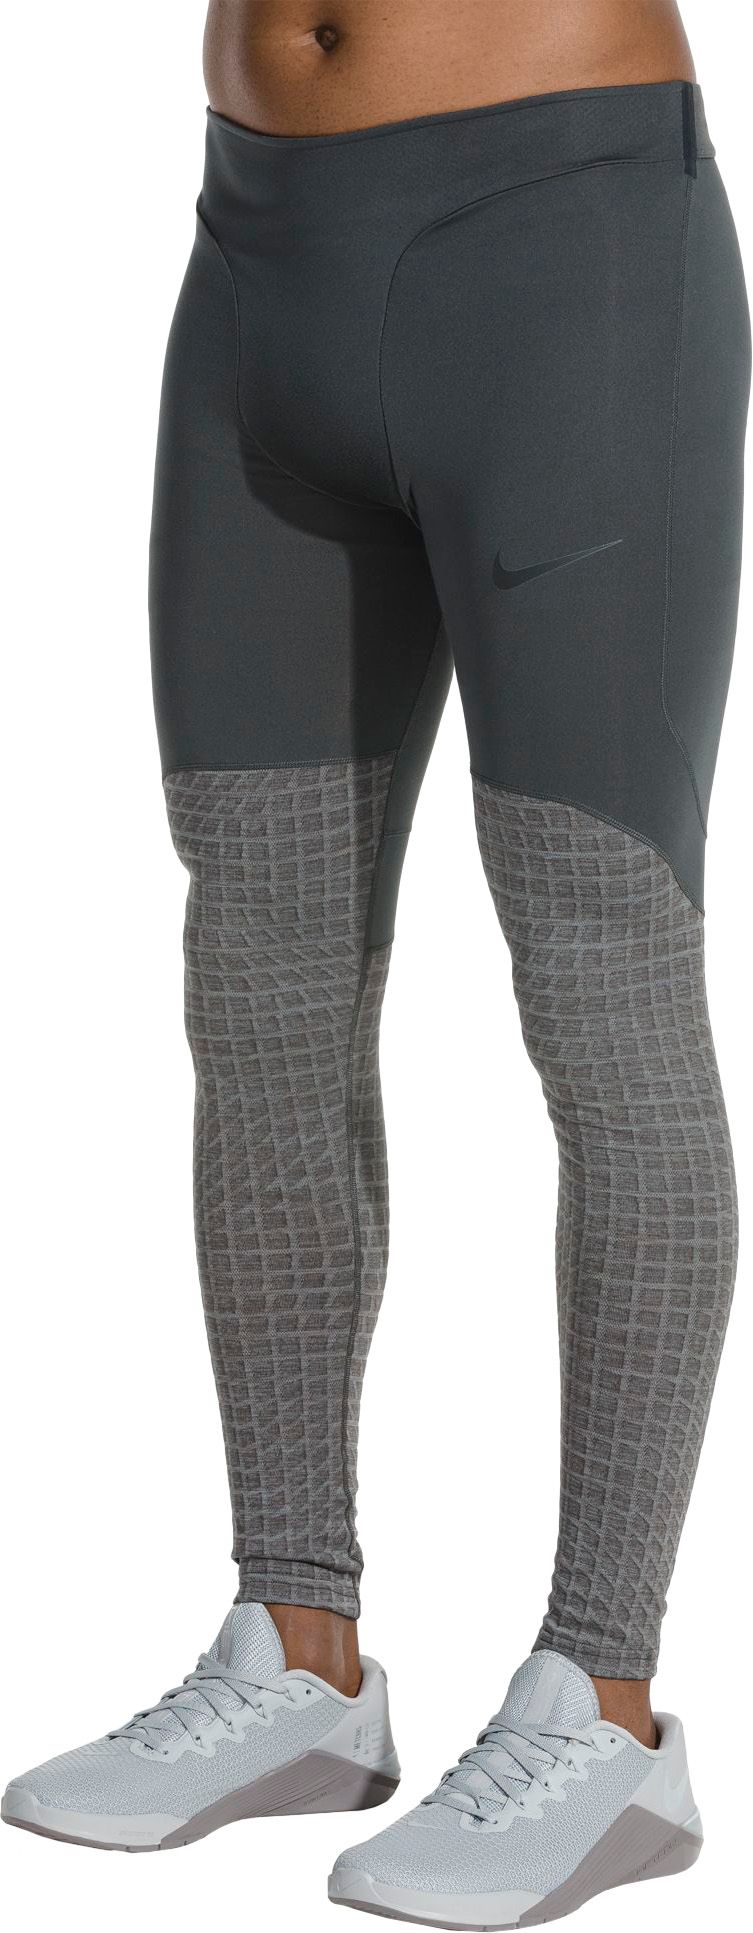 nike men's pro therma compression tights